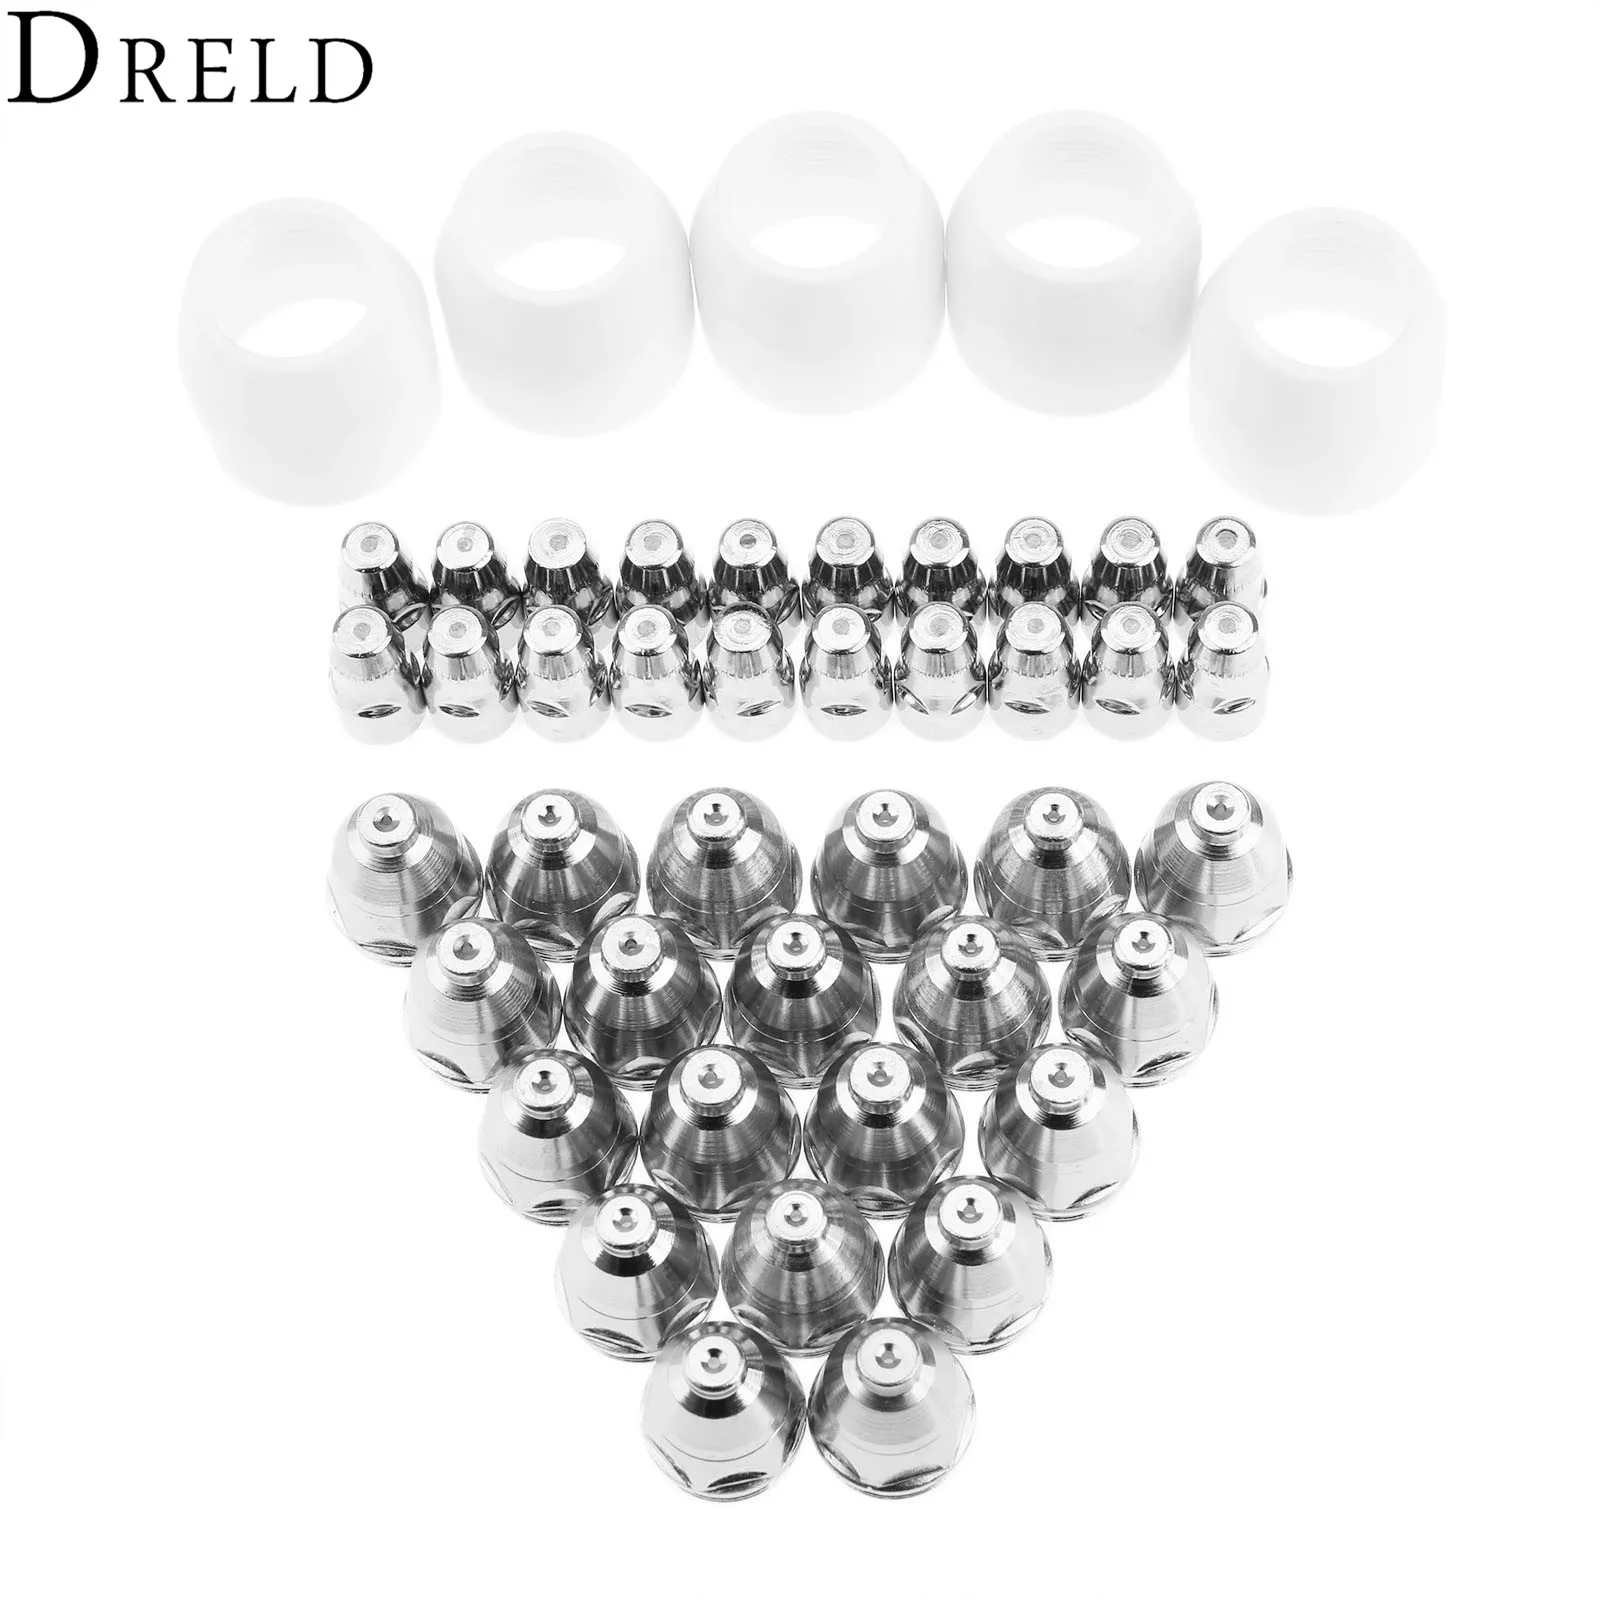 DRELD 45pcs/set P80 Electrode Tips 1.3 Nozzle Shield Cup for P-80 Plasma Cutter Torch Consumable 80-100A Welding Soldering Tool